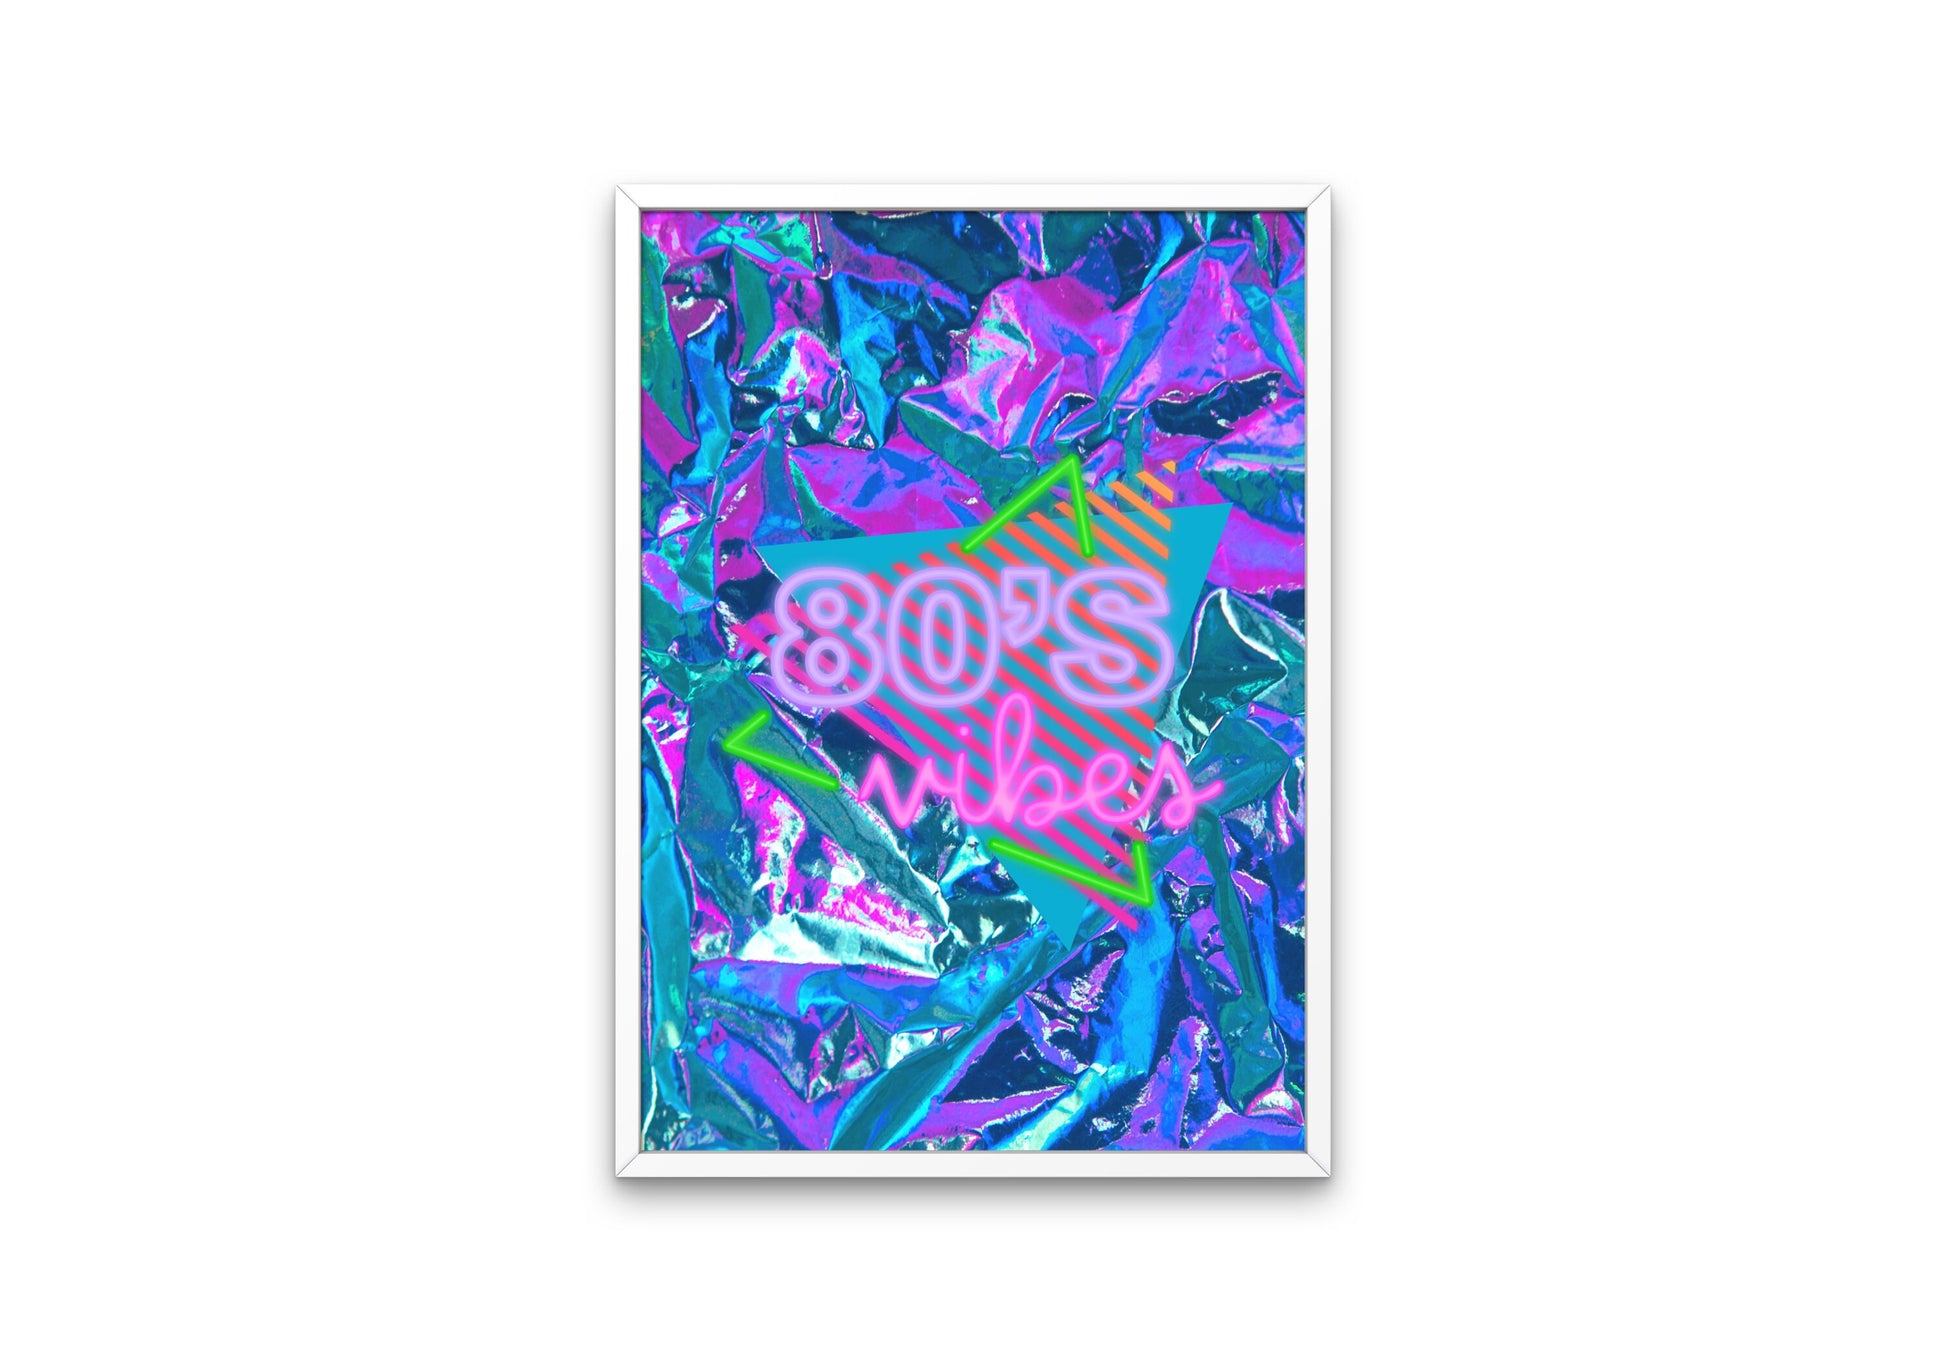 Neon 80's Vibes DIGITAL PRINT, Bright Colorful Prints, Neon Lights, 80s poster, Abstract neon art, 80s nostalgia, 80s theme party, 80s theme